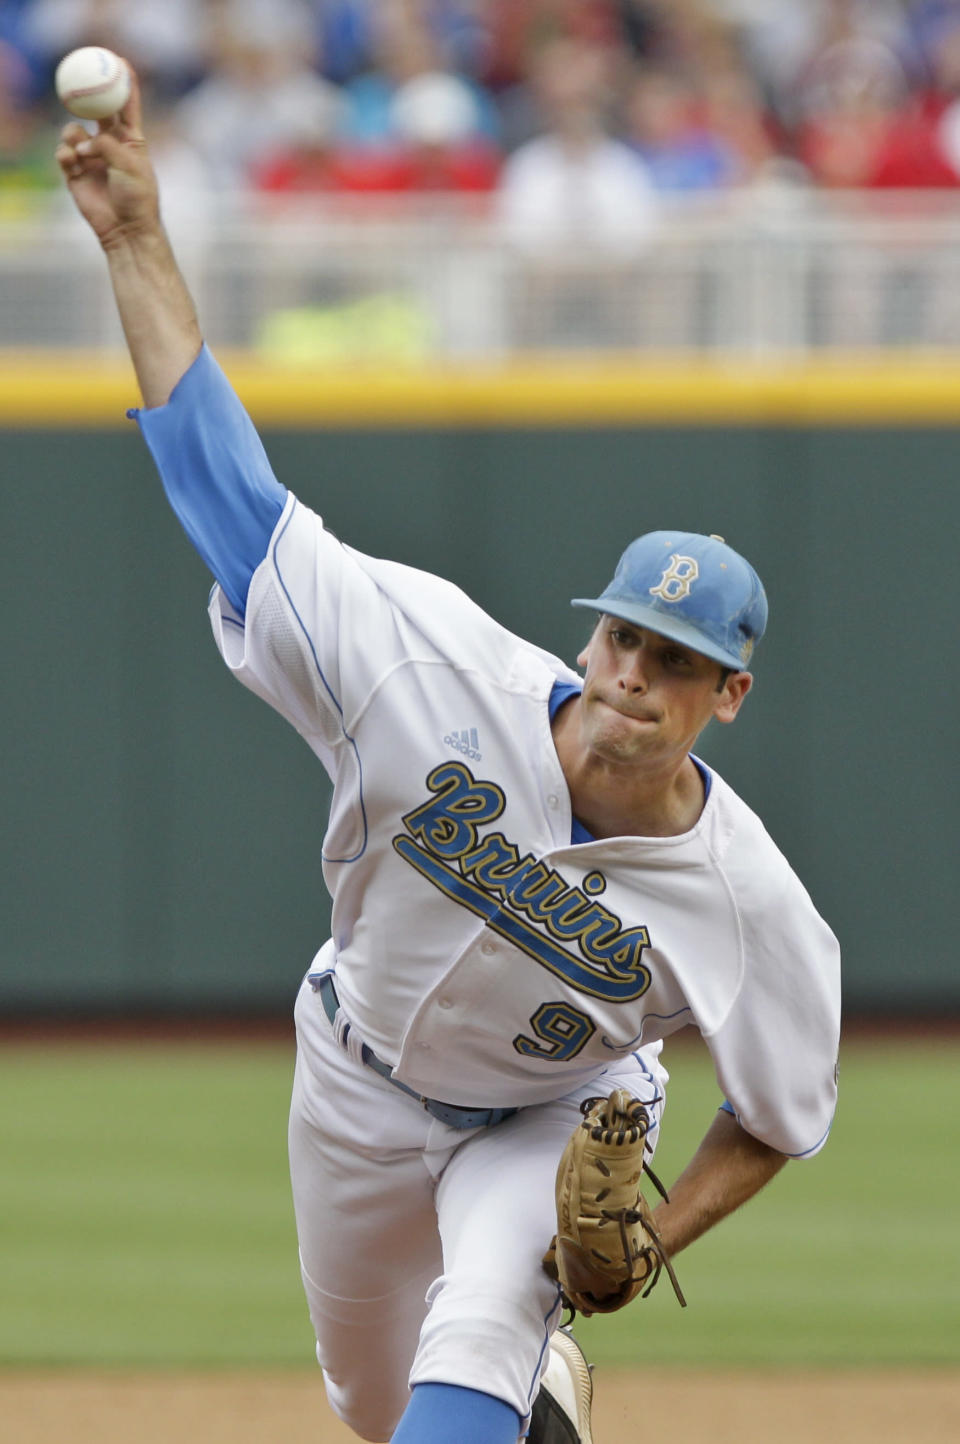 UCLA's starting pitcher Adam Plutko works against Stony Brook in the first inning of an NCAA College World Series baseball game in Omaha, Neb., Friday, June 15, 2012. (AP Photo/Nati Harnik)